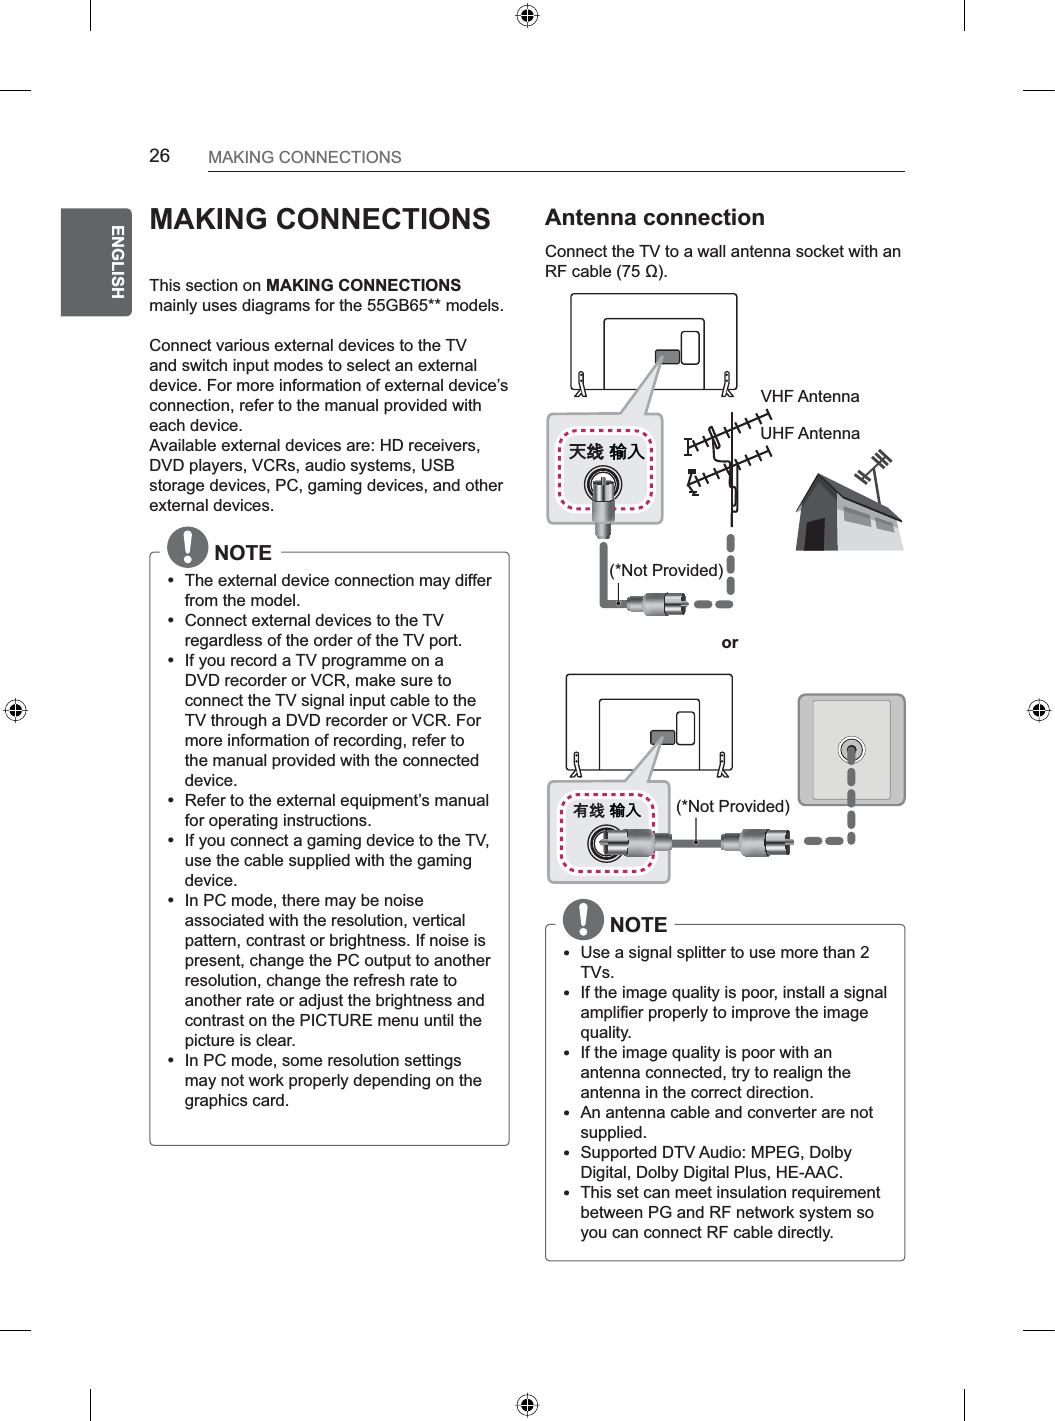 26ENGENGLISHMAKING CONNECTIONSMAKING CONNECTIONSThis section on MAKING CONNECTIONSmainly uses diagrams for the 55GB65** models.Connect various external devices to the TV and switch input modes to select an external device. For more information of external device’s connection, refer to the manual provided with each device.Available external devices are: HD receivers, DVD players, VCRs, audio systems, USB storage devices, PC, gaming devices, and other external devices. NOTEyThe external device connection may differ from the model.yConnect external devices to the TV regardless of the order of the TV port.yIf you record a TV programme on a DVD recorder or VCR, make sure to connect the TV signal input cable to the TV through a DVD recorder or VCR. For more information of recording, refer to the manual provided with the connected device.yRefer to the external equipment’s manual for operating instructions.yIf you connect a gaming device to the TV, use the cable supplied with the gaming device.yIn PC mode, there may be noise associated with the resolution, vertical pattern, contrast or brightness. If noise is present, change the PC output to another resolution, change the refresh rate to another rate or adjust the brightness and contrast on the PICTURE menu until the picture is clear.yIn PC mode, some resolution settings may not work properly depending on the graphics card.Antenna connectionConnect the TV to a wall antenna socket with an RF cable (75 ).VHF AntennaUHF Antenna(*Not Provided)(*Not Provided)or NOTEyUse a signal splitter to use more than 2 TVs.yIf the image quality is poor, install a signal amplifier properly to improve the image quality.yIf the image quality is poor with an antenna connected, try to realign the antenna in the correct direction.yAn antenna cable and converter are not supplied.ySupported DTV Audio: MPEG, Dolby Digital, Dolby Digital Plus, HE-AAC.yThis set can meet insulation requirement between PG and RF network system so you can connect RF cable directly.